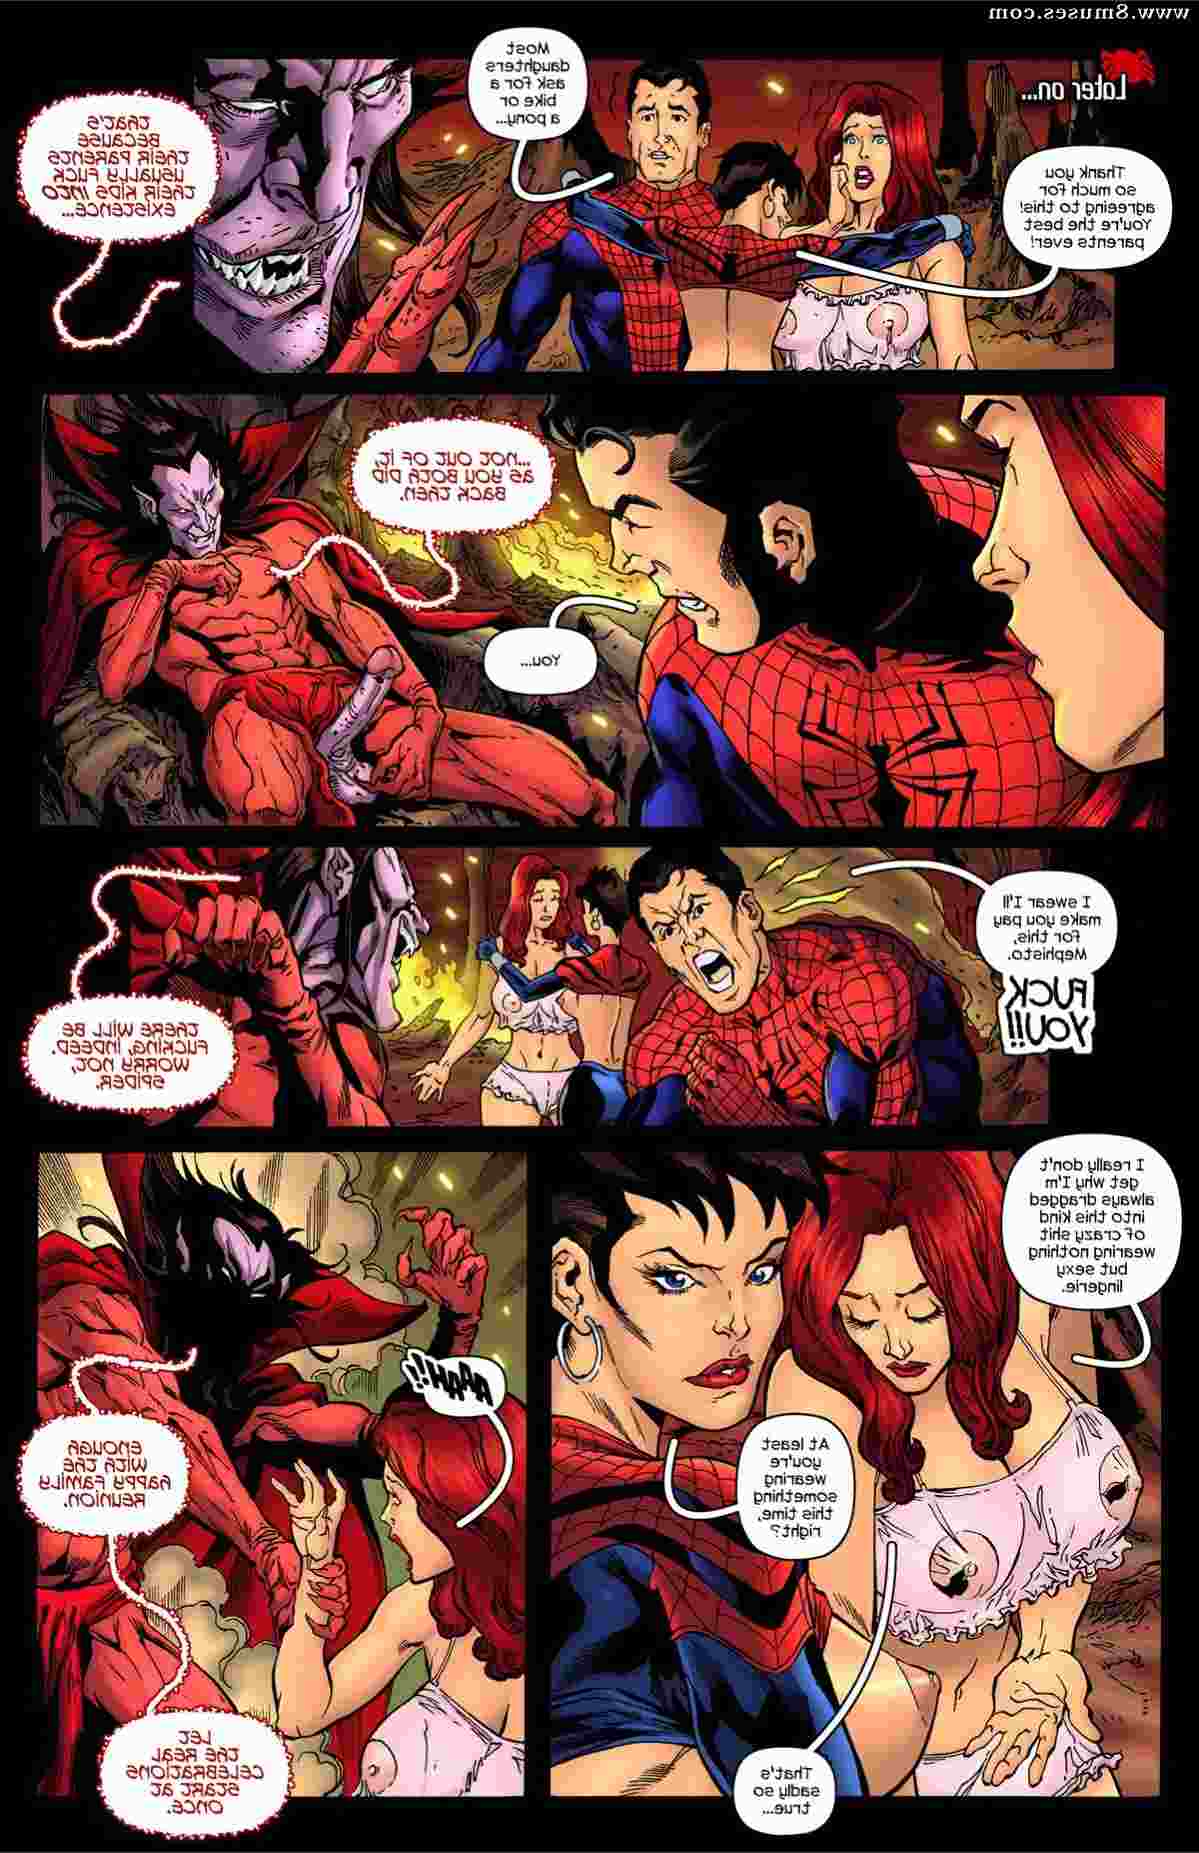 Tracy-Scops-Comics/Spider-Girl-One-more-Day Spider-Girl__One_more_Day__8muses_-_Sex_and_Porn_Comics_7.jpg